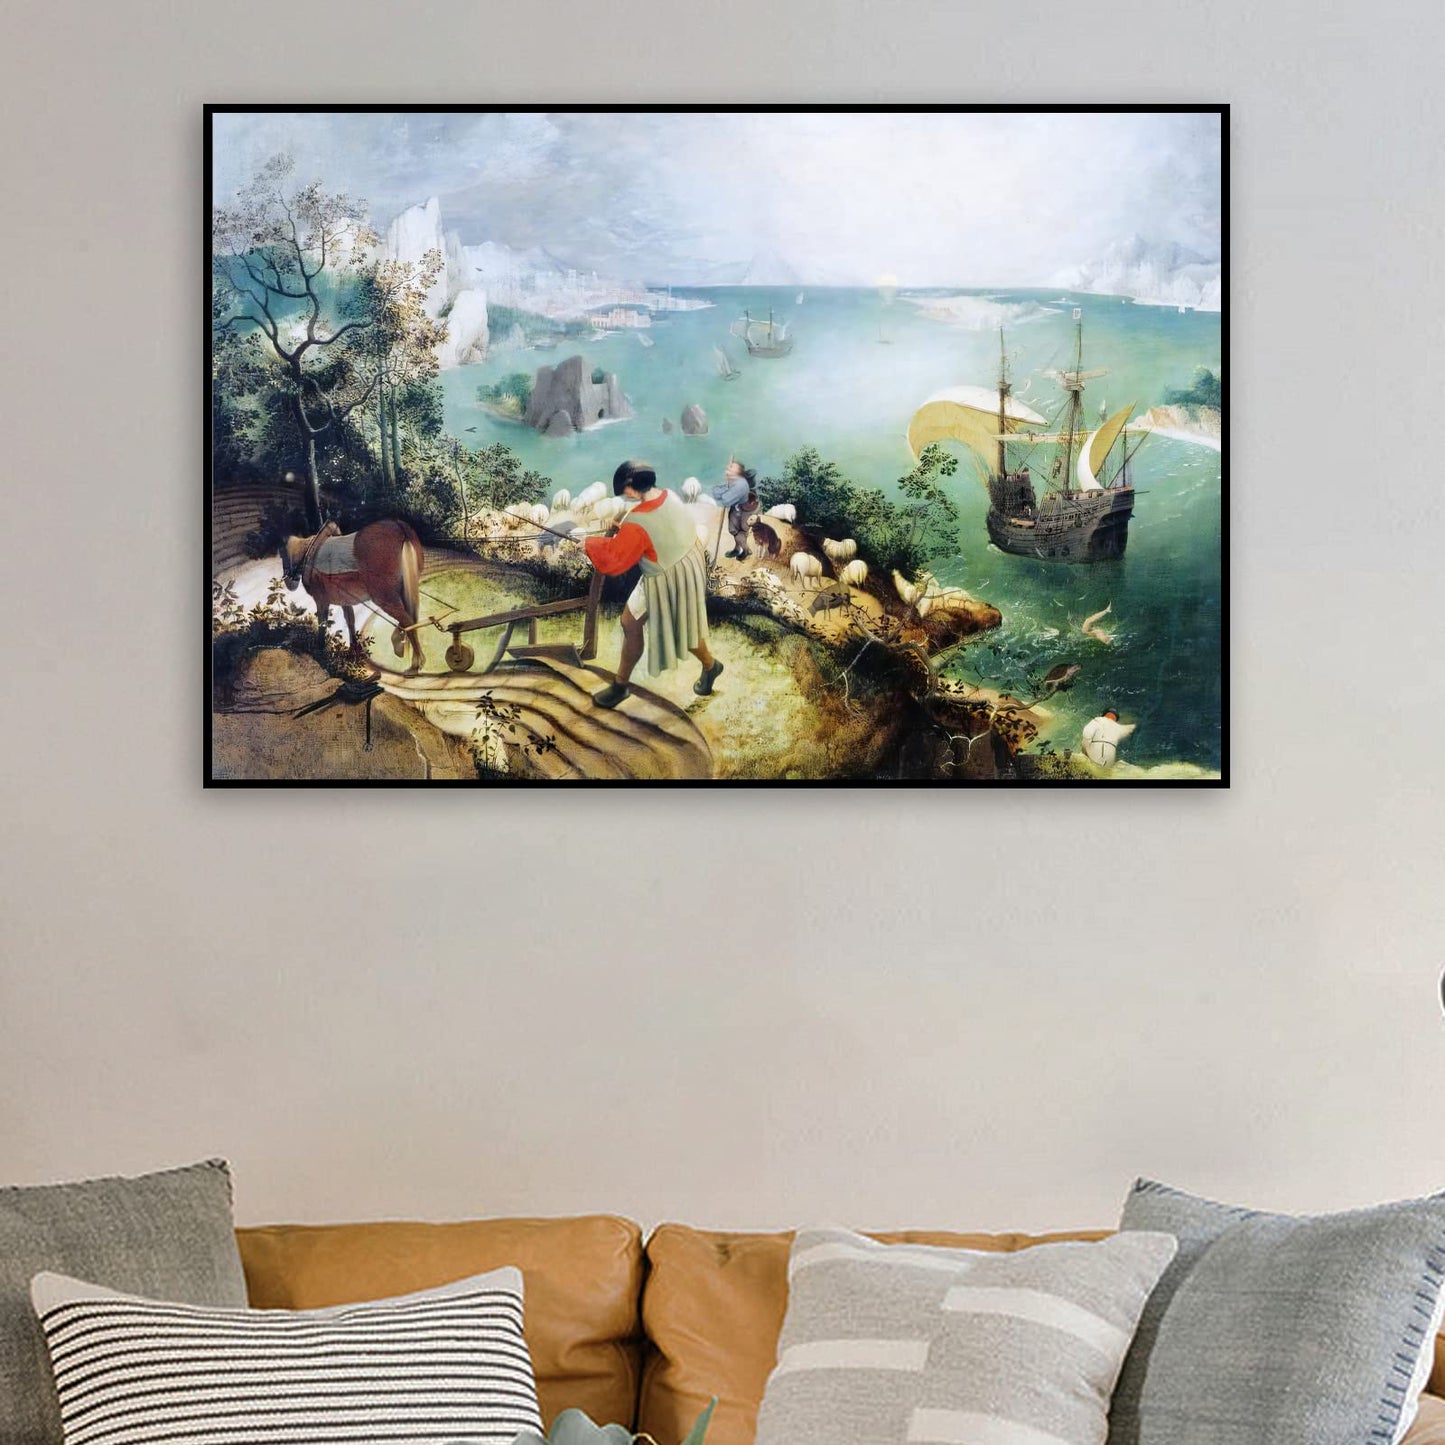 ZZPT Pieter Brueghel The Elder Prints - Landscape with the Fall of Icarus Poster - Modern Canvas Wall Art Famous Painting Reproduction for Living Room Office Unframed (12x18in/30x45cm)